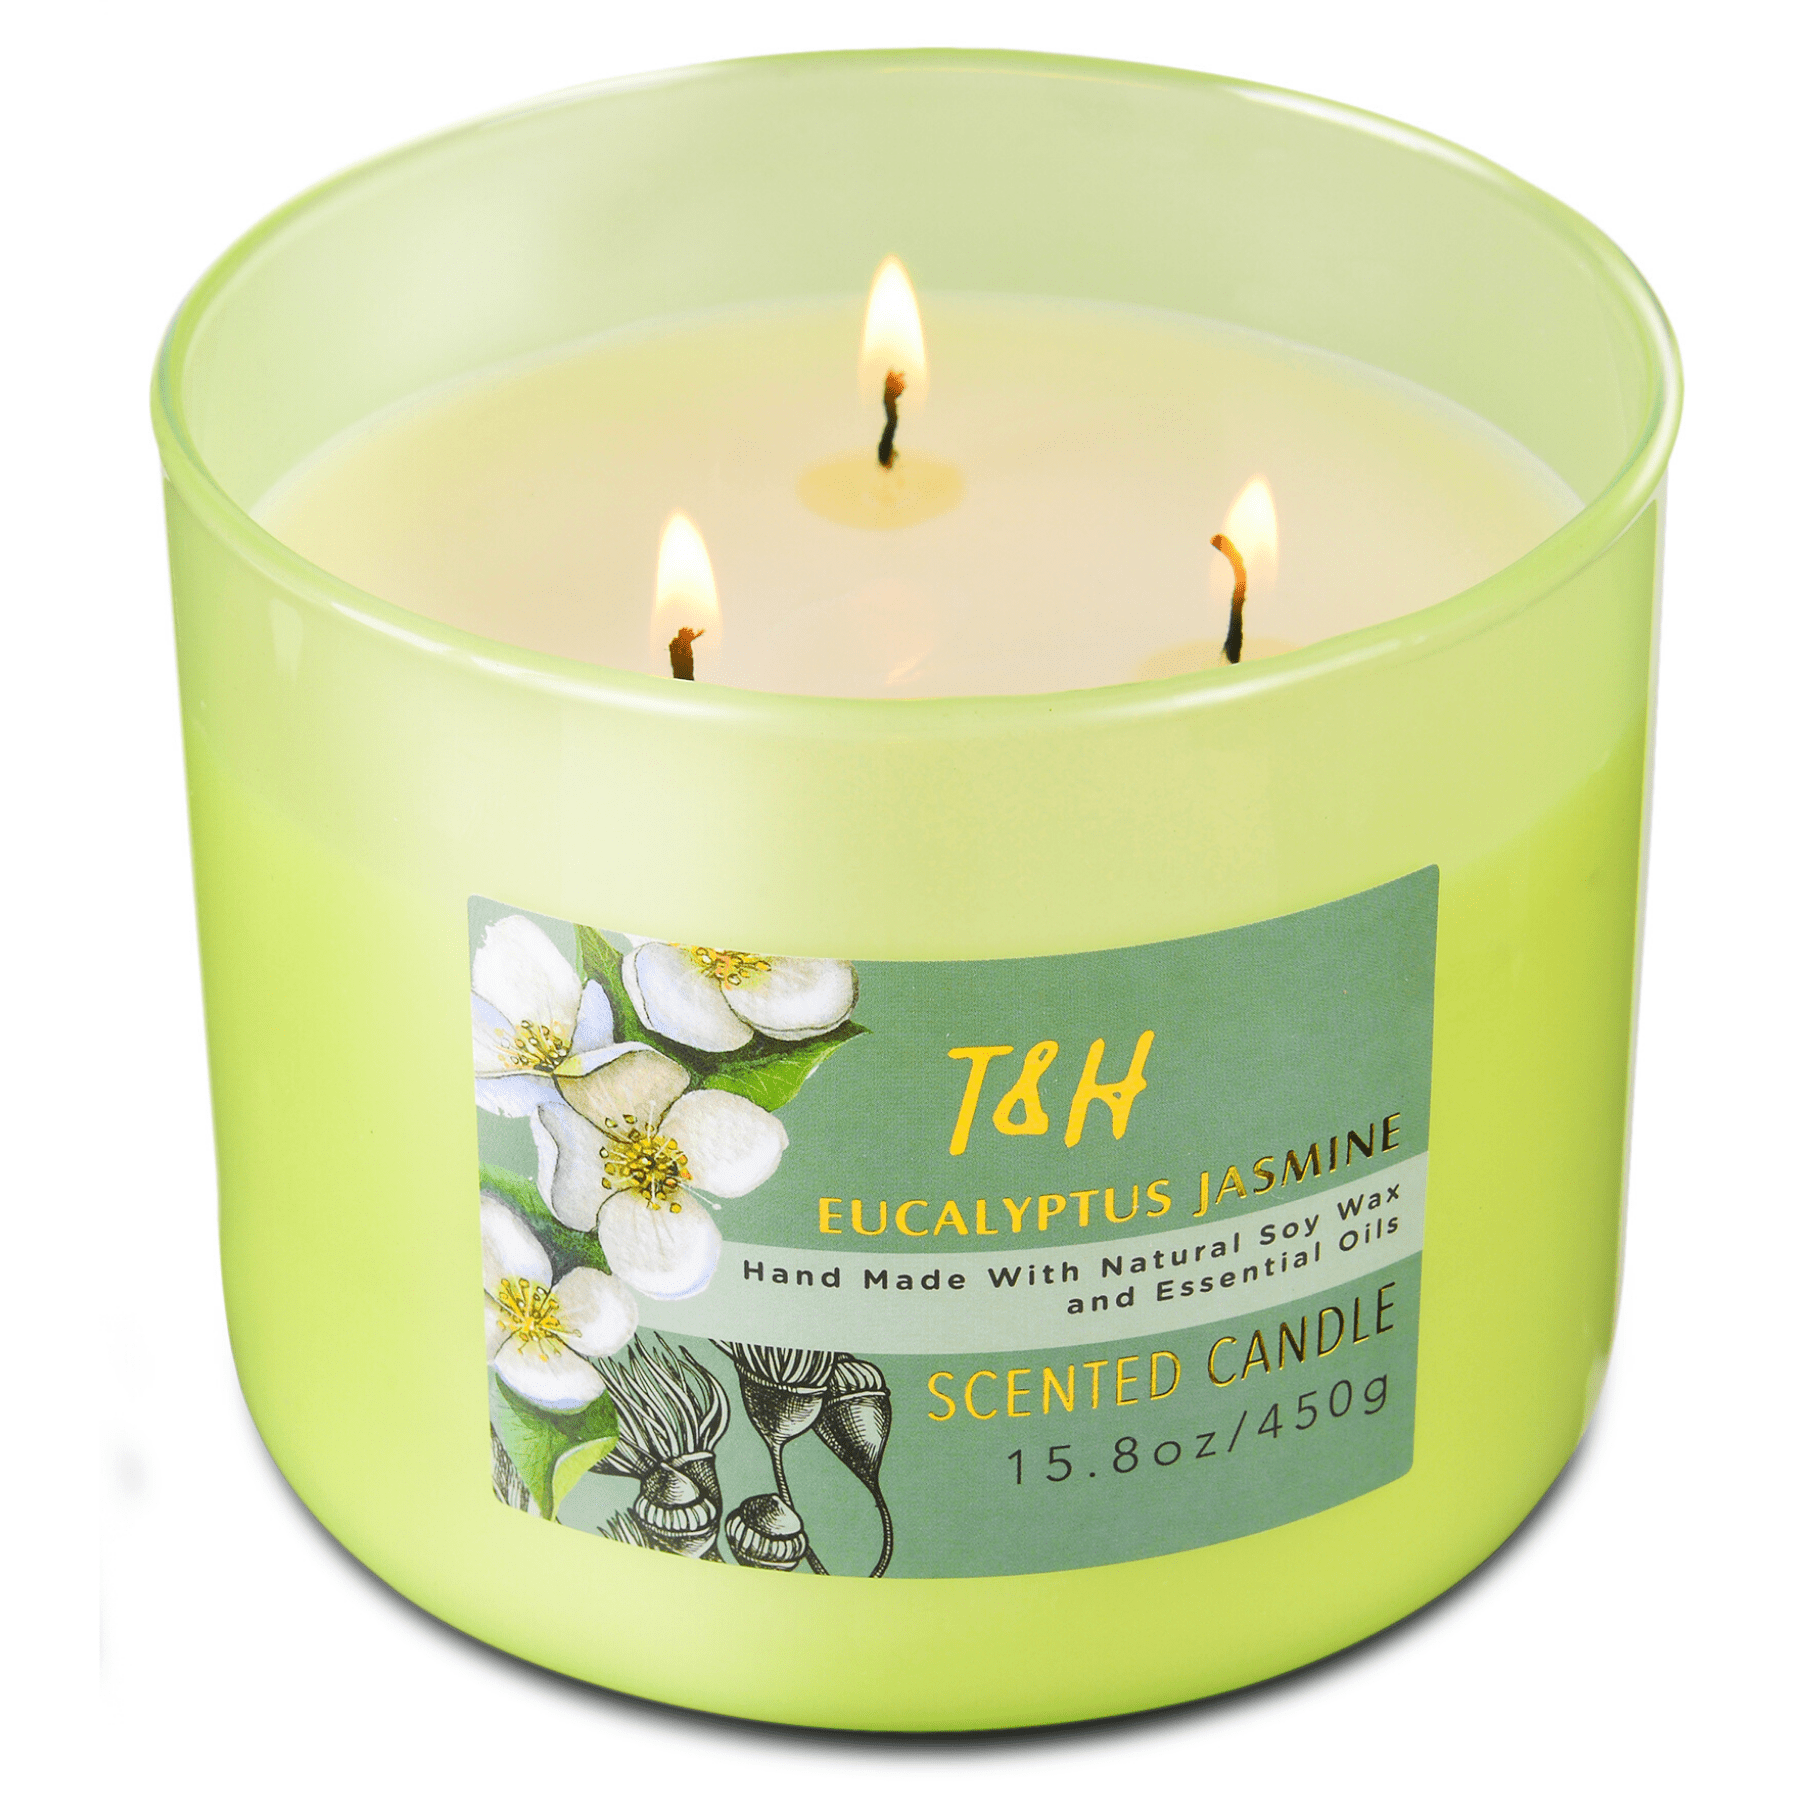 40hr LIME EUCALYPTUS & PEPPERMINT Triple Scented Candle home fresh fragrances